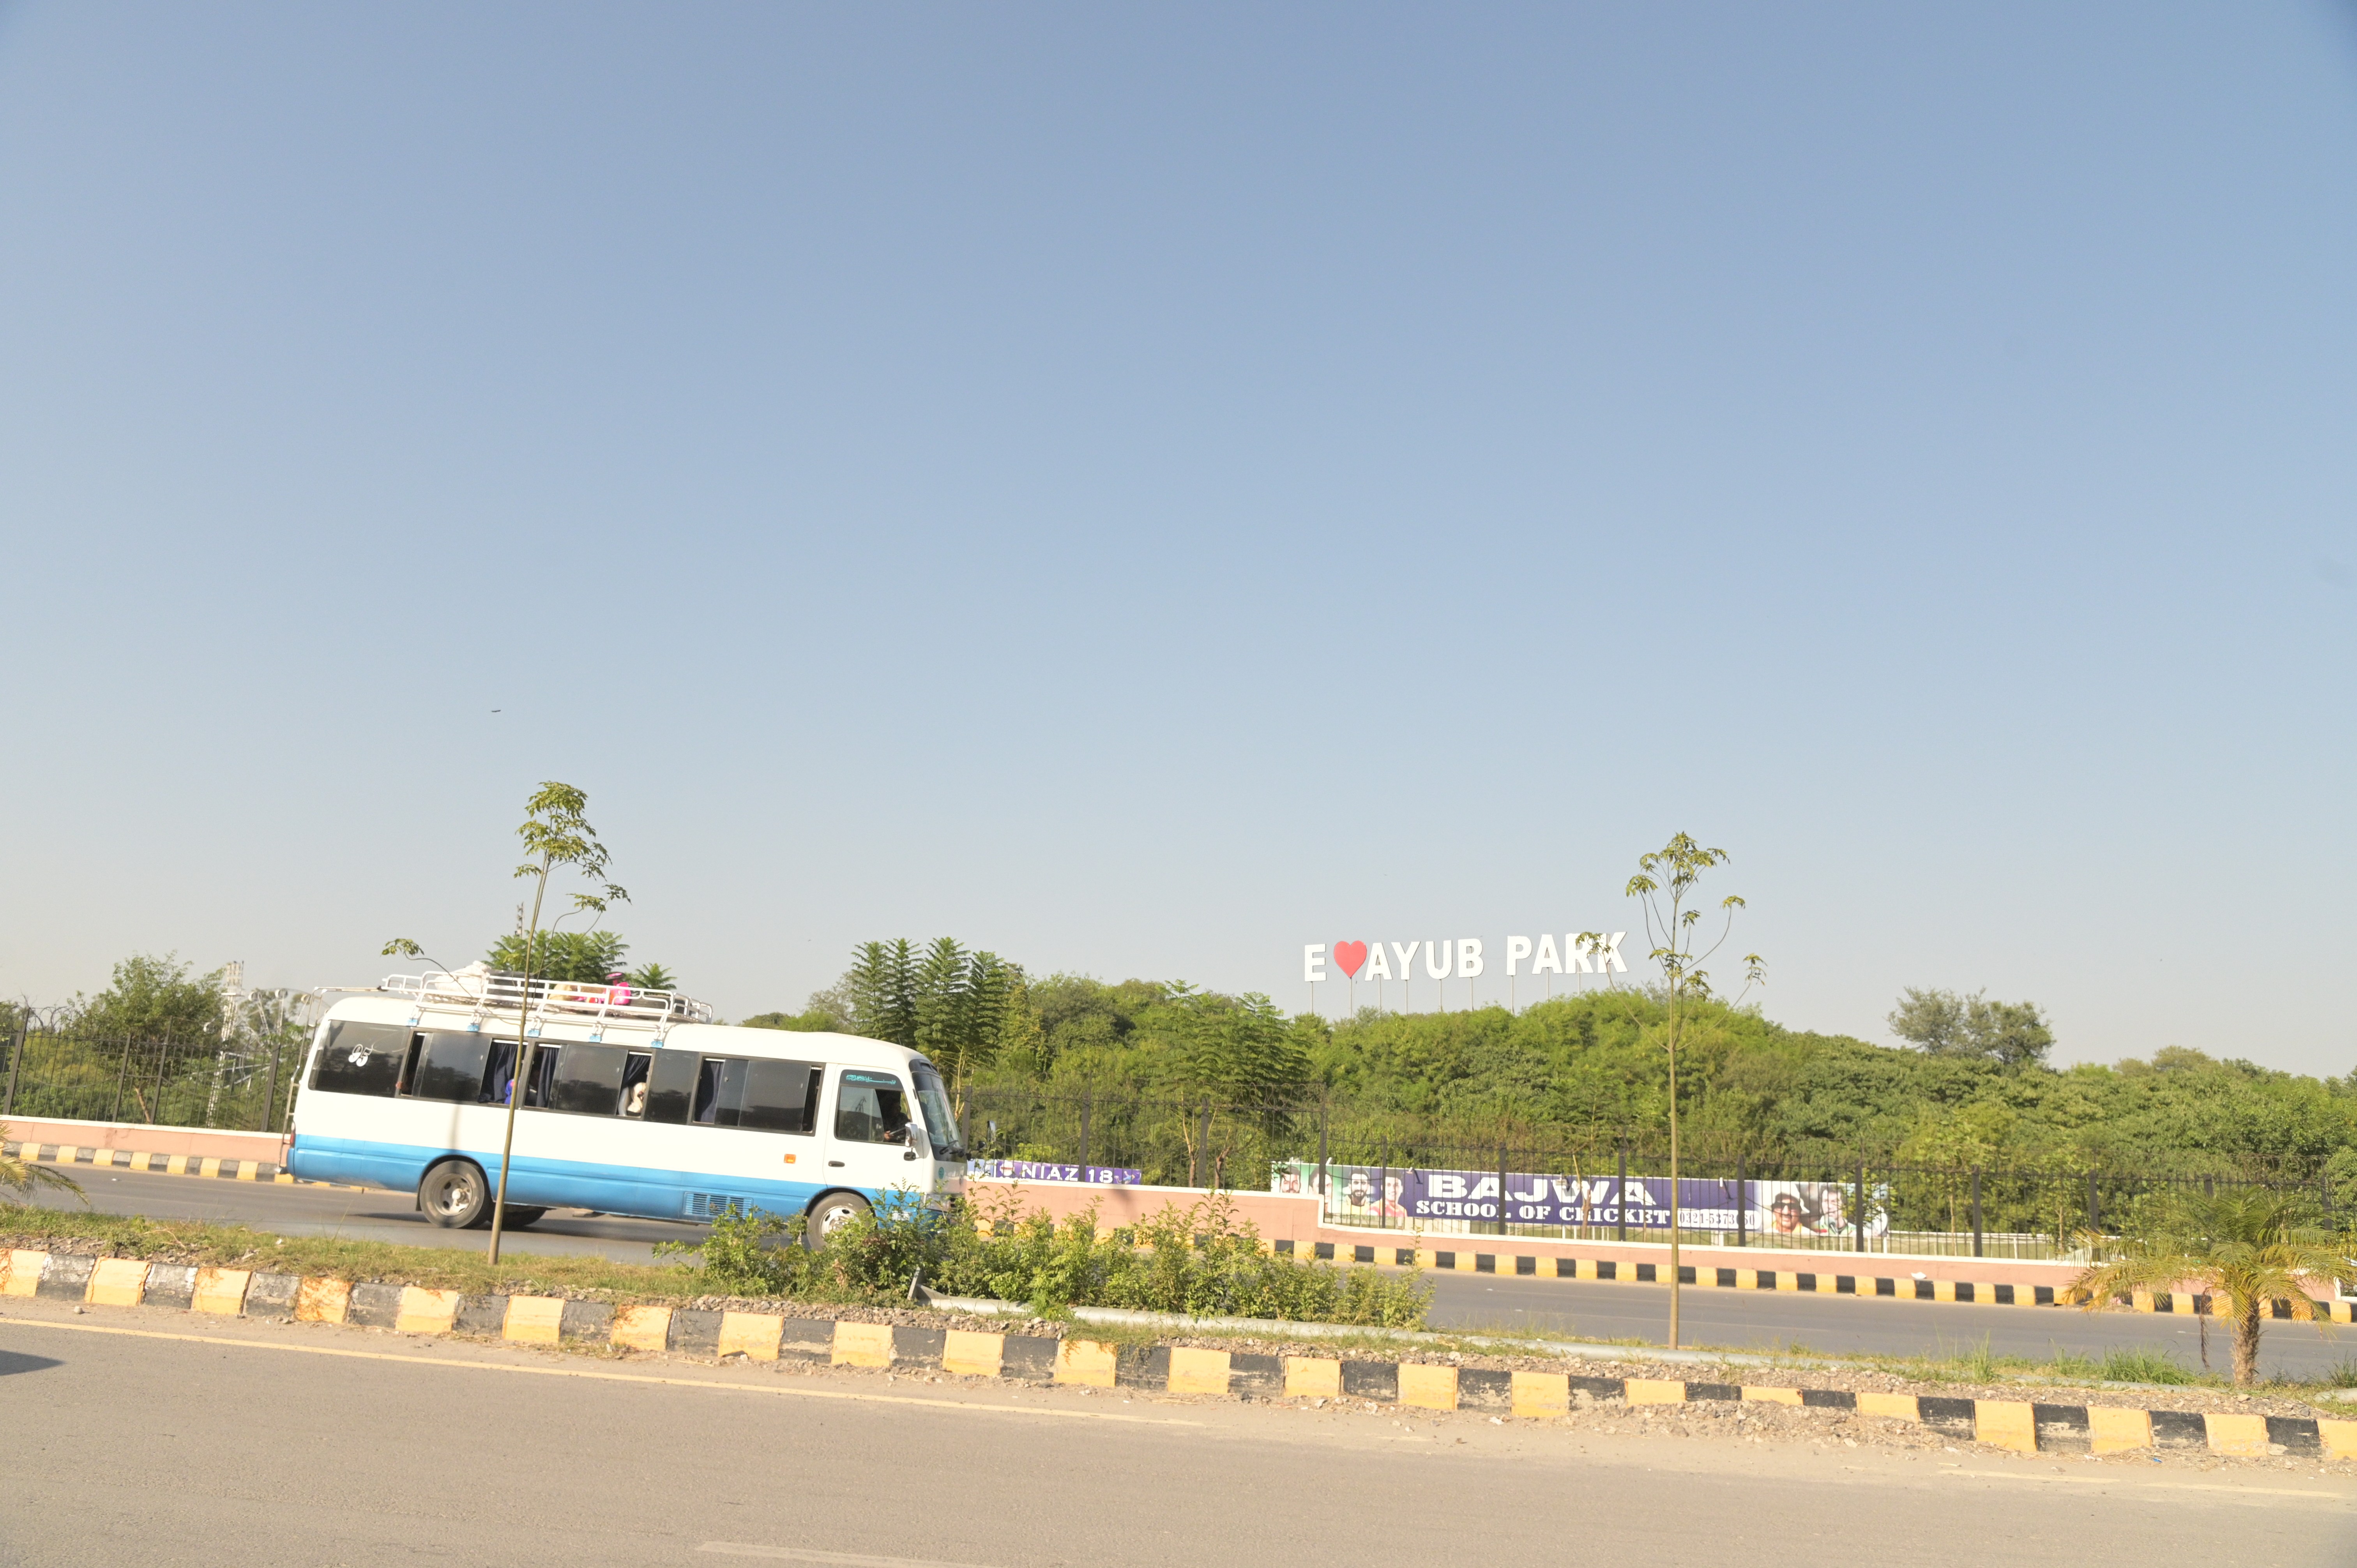 A bus passing by the Ayub Park located on the GT road